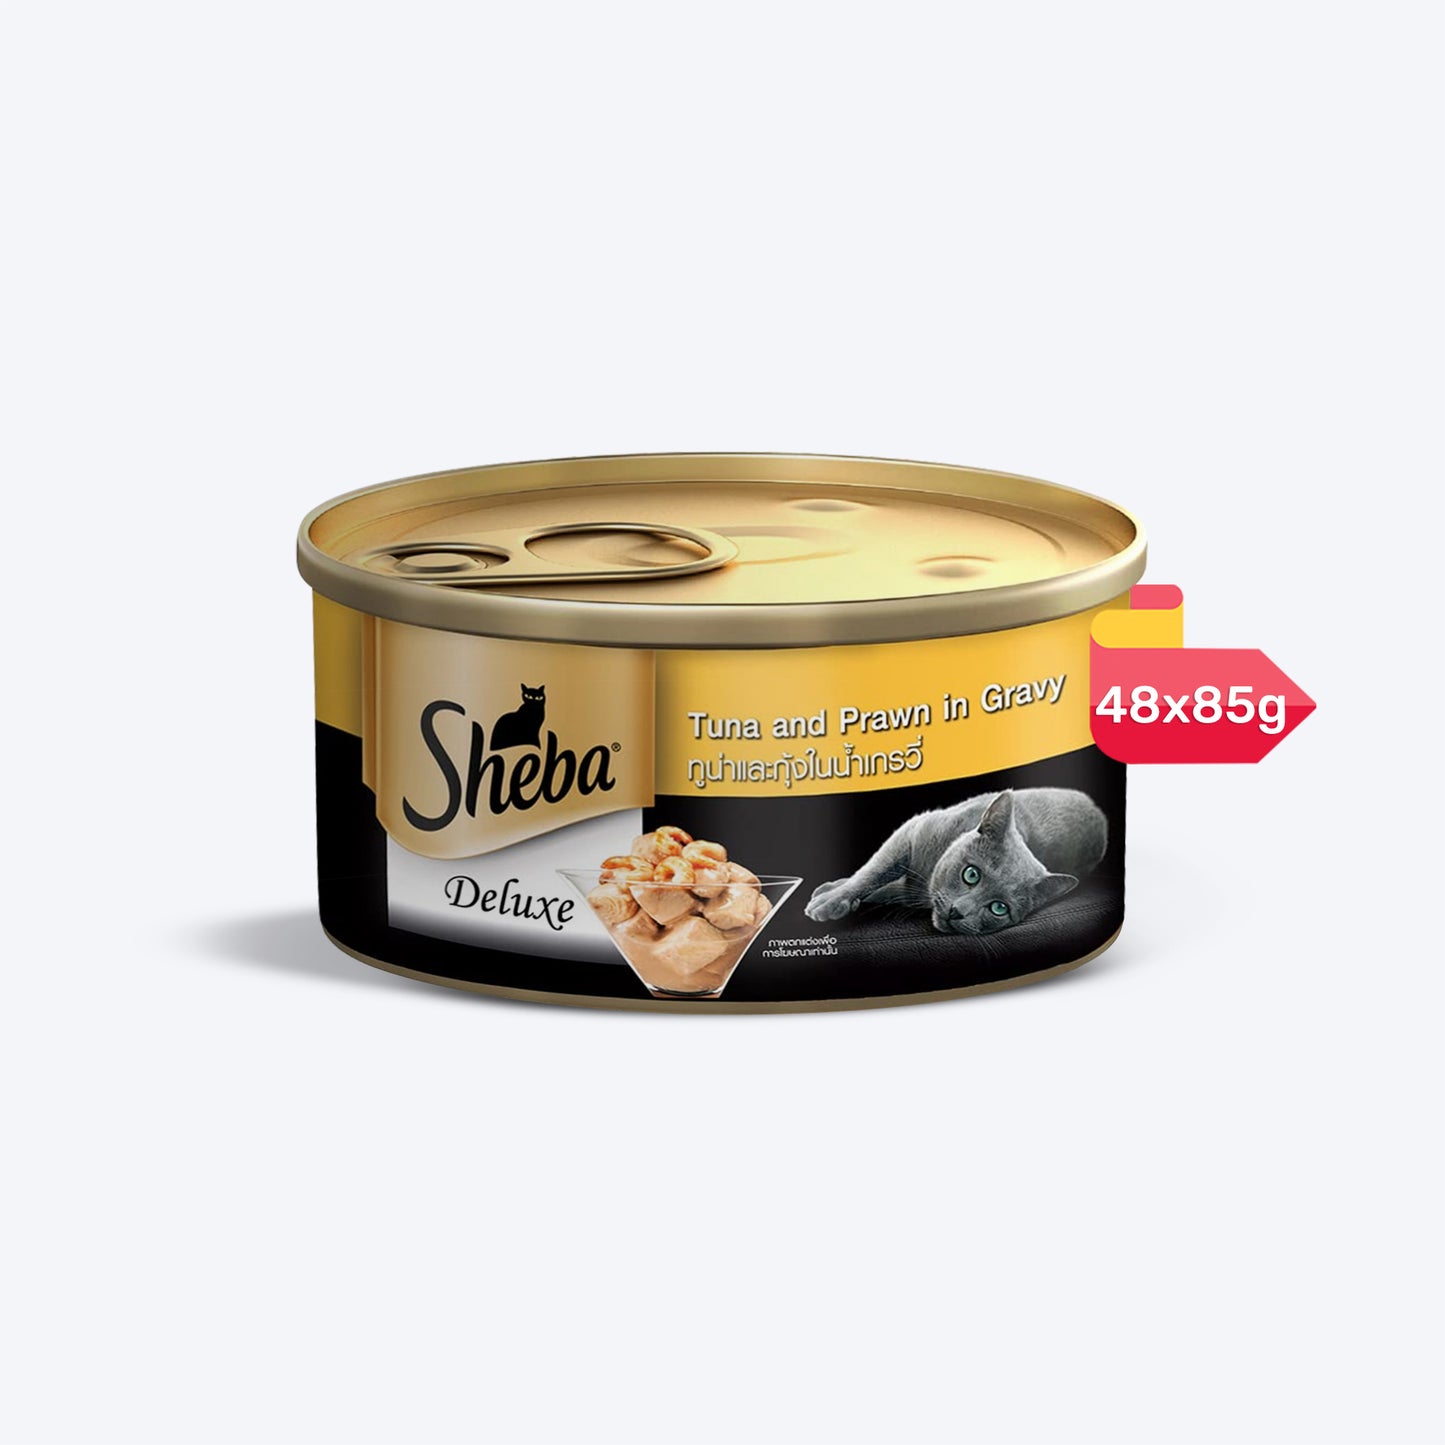 Sheba Tuna Fillets and Whole Prawns in Gravy Adult Wet Cat Food - 85 g packs - Heads Up For Tails